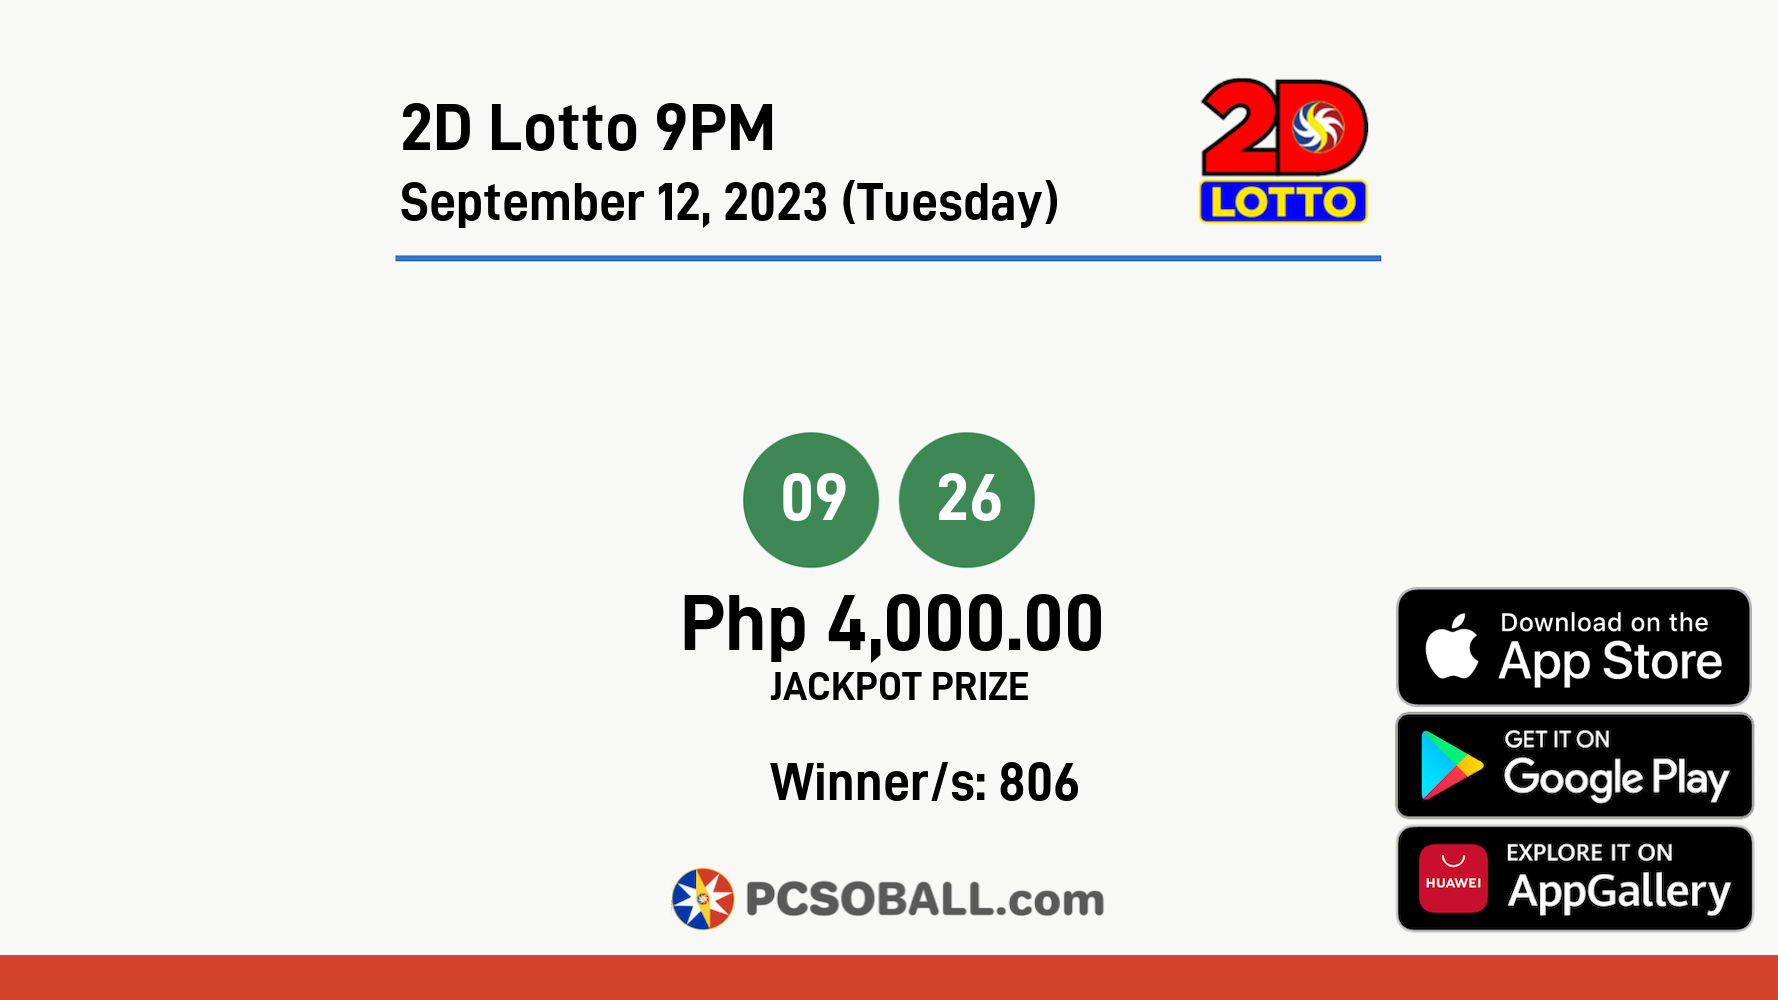 2D Lotto 9PM September 12, 2023 (Tuesday) Result